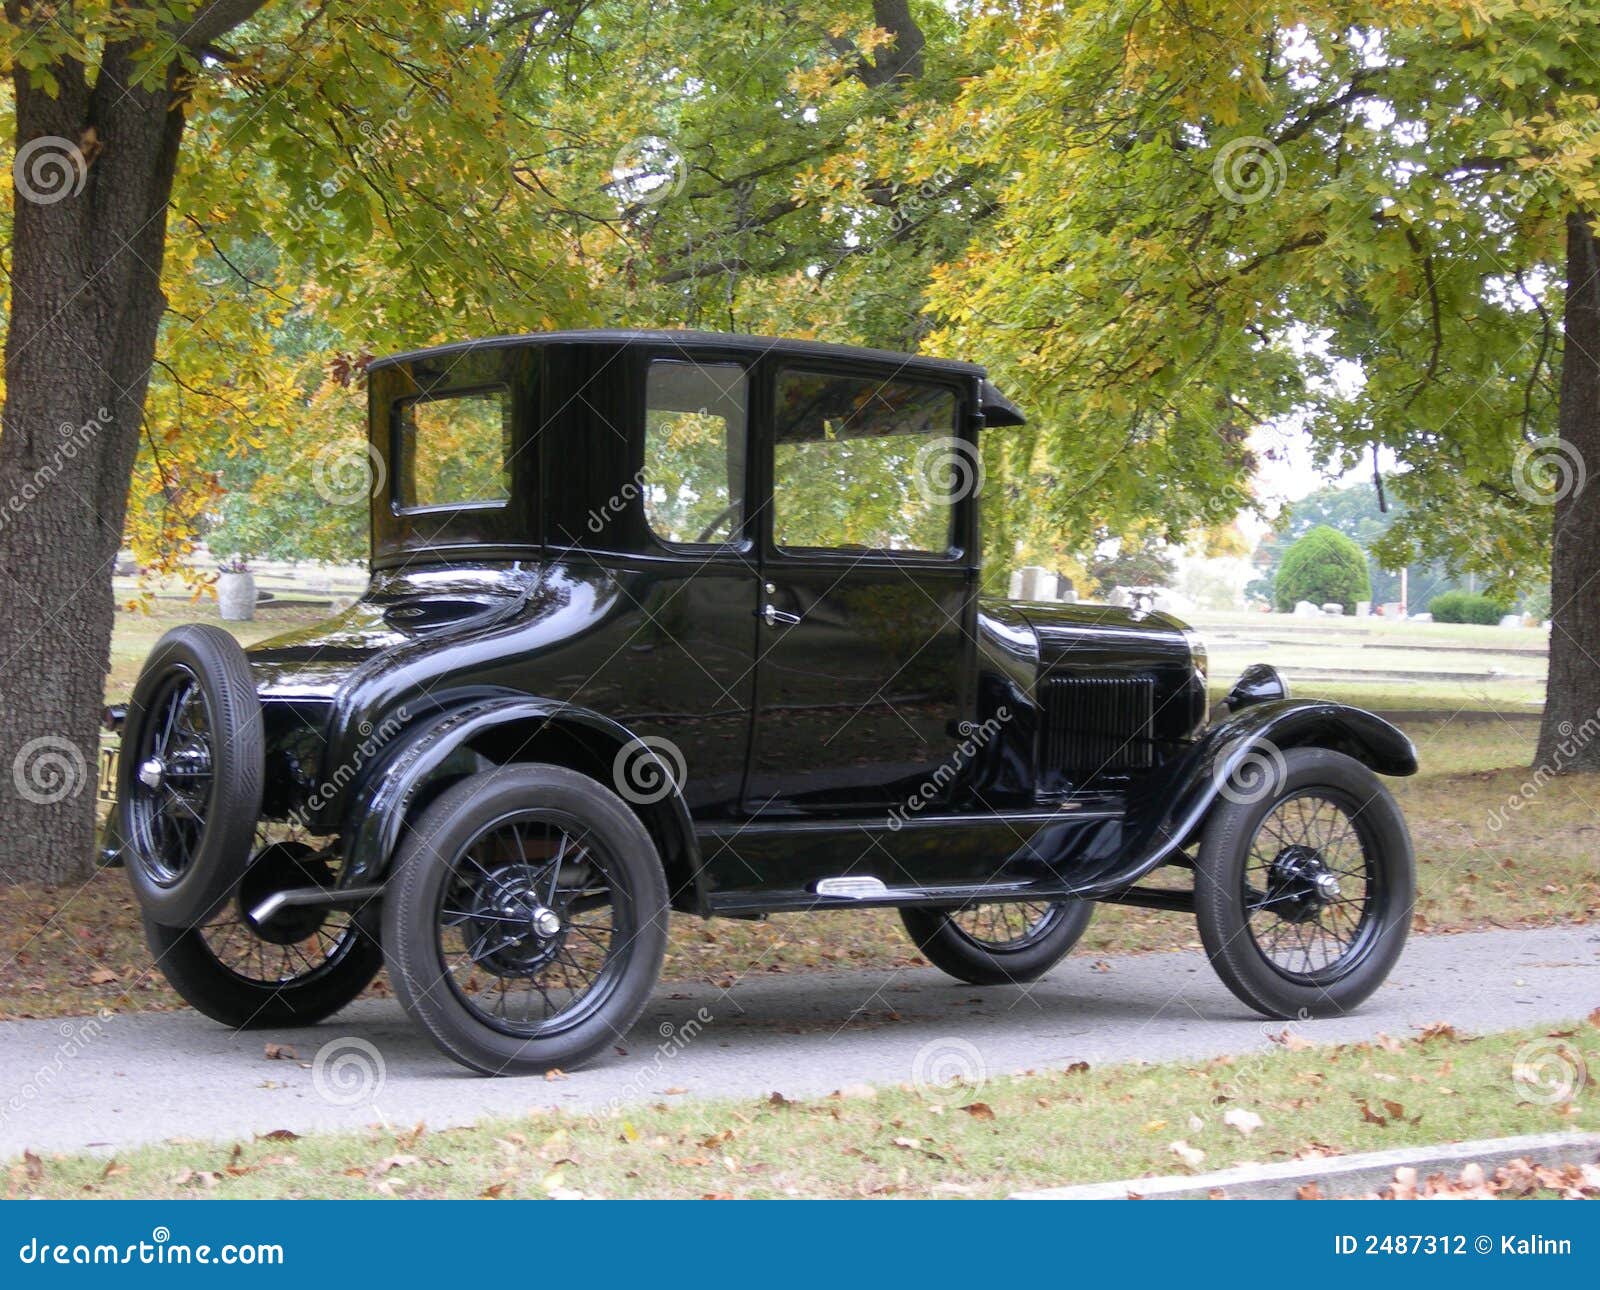 Payment plans for the ford model t #2